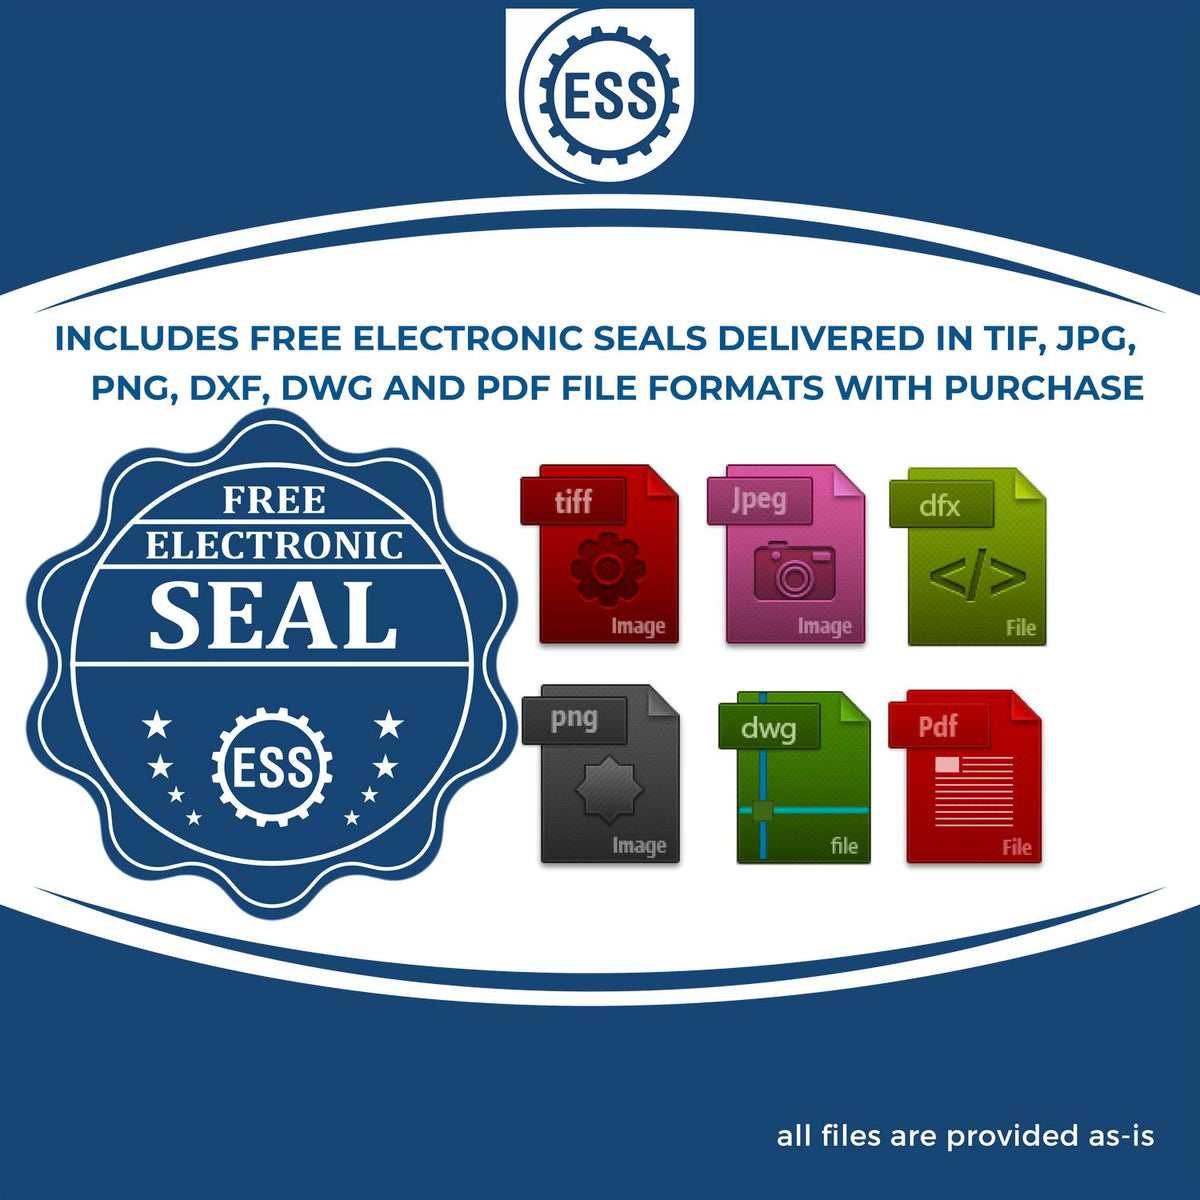 An infographic for the free electronic seal for the Heavy Duty Cast Iron New Mexico Geologist Seal Embosser illustrating the different file type icons such as DXF, DWG, TIF, JPG and PNG.